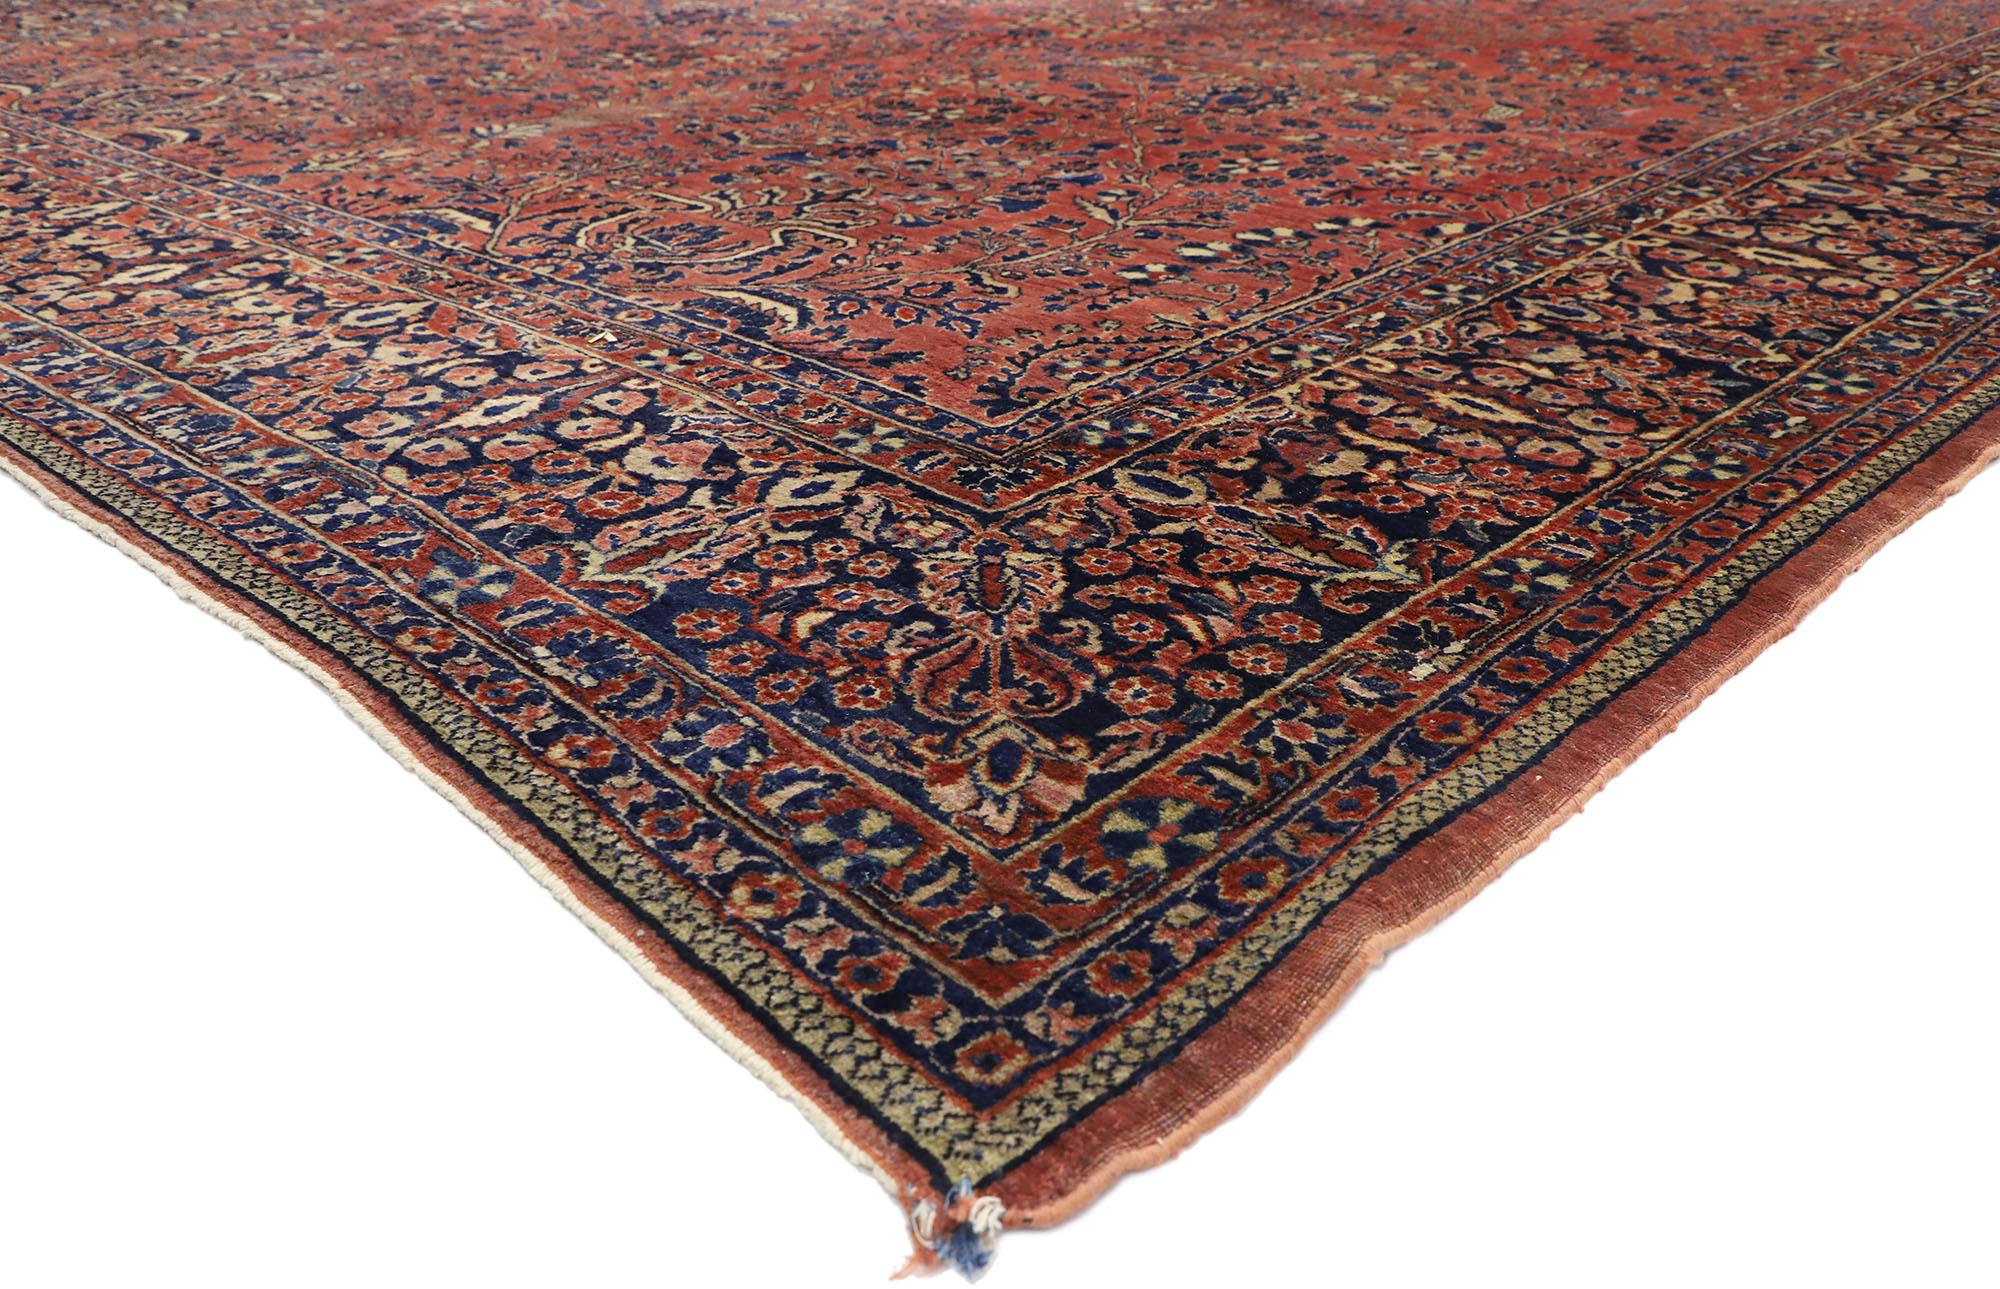 77381 Oversized Antique Persian Sarouk Rug, 10'07 x 23'02. Oversized Persian Sarouk rugs refer to large-scale handwoven rugs originating from the Sarouk region of Iran. These rugs are characterized by their expansive dimensions, typically exceeding